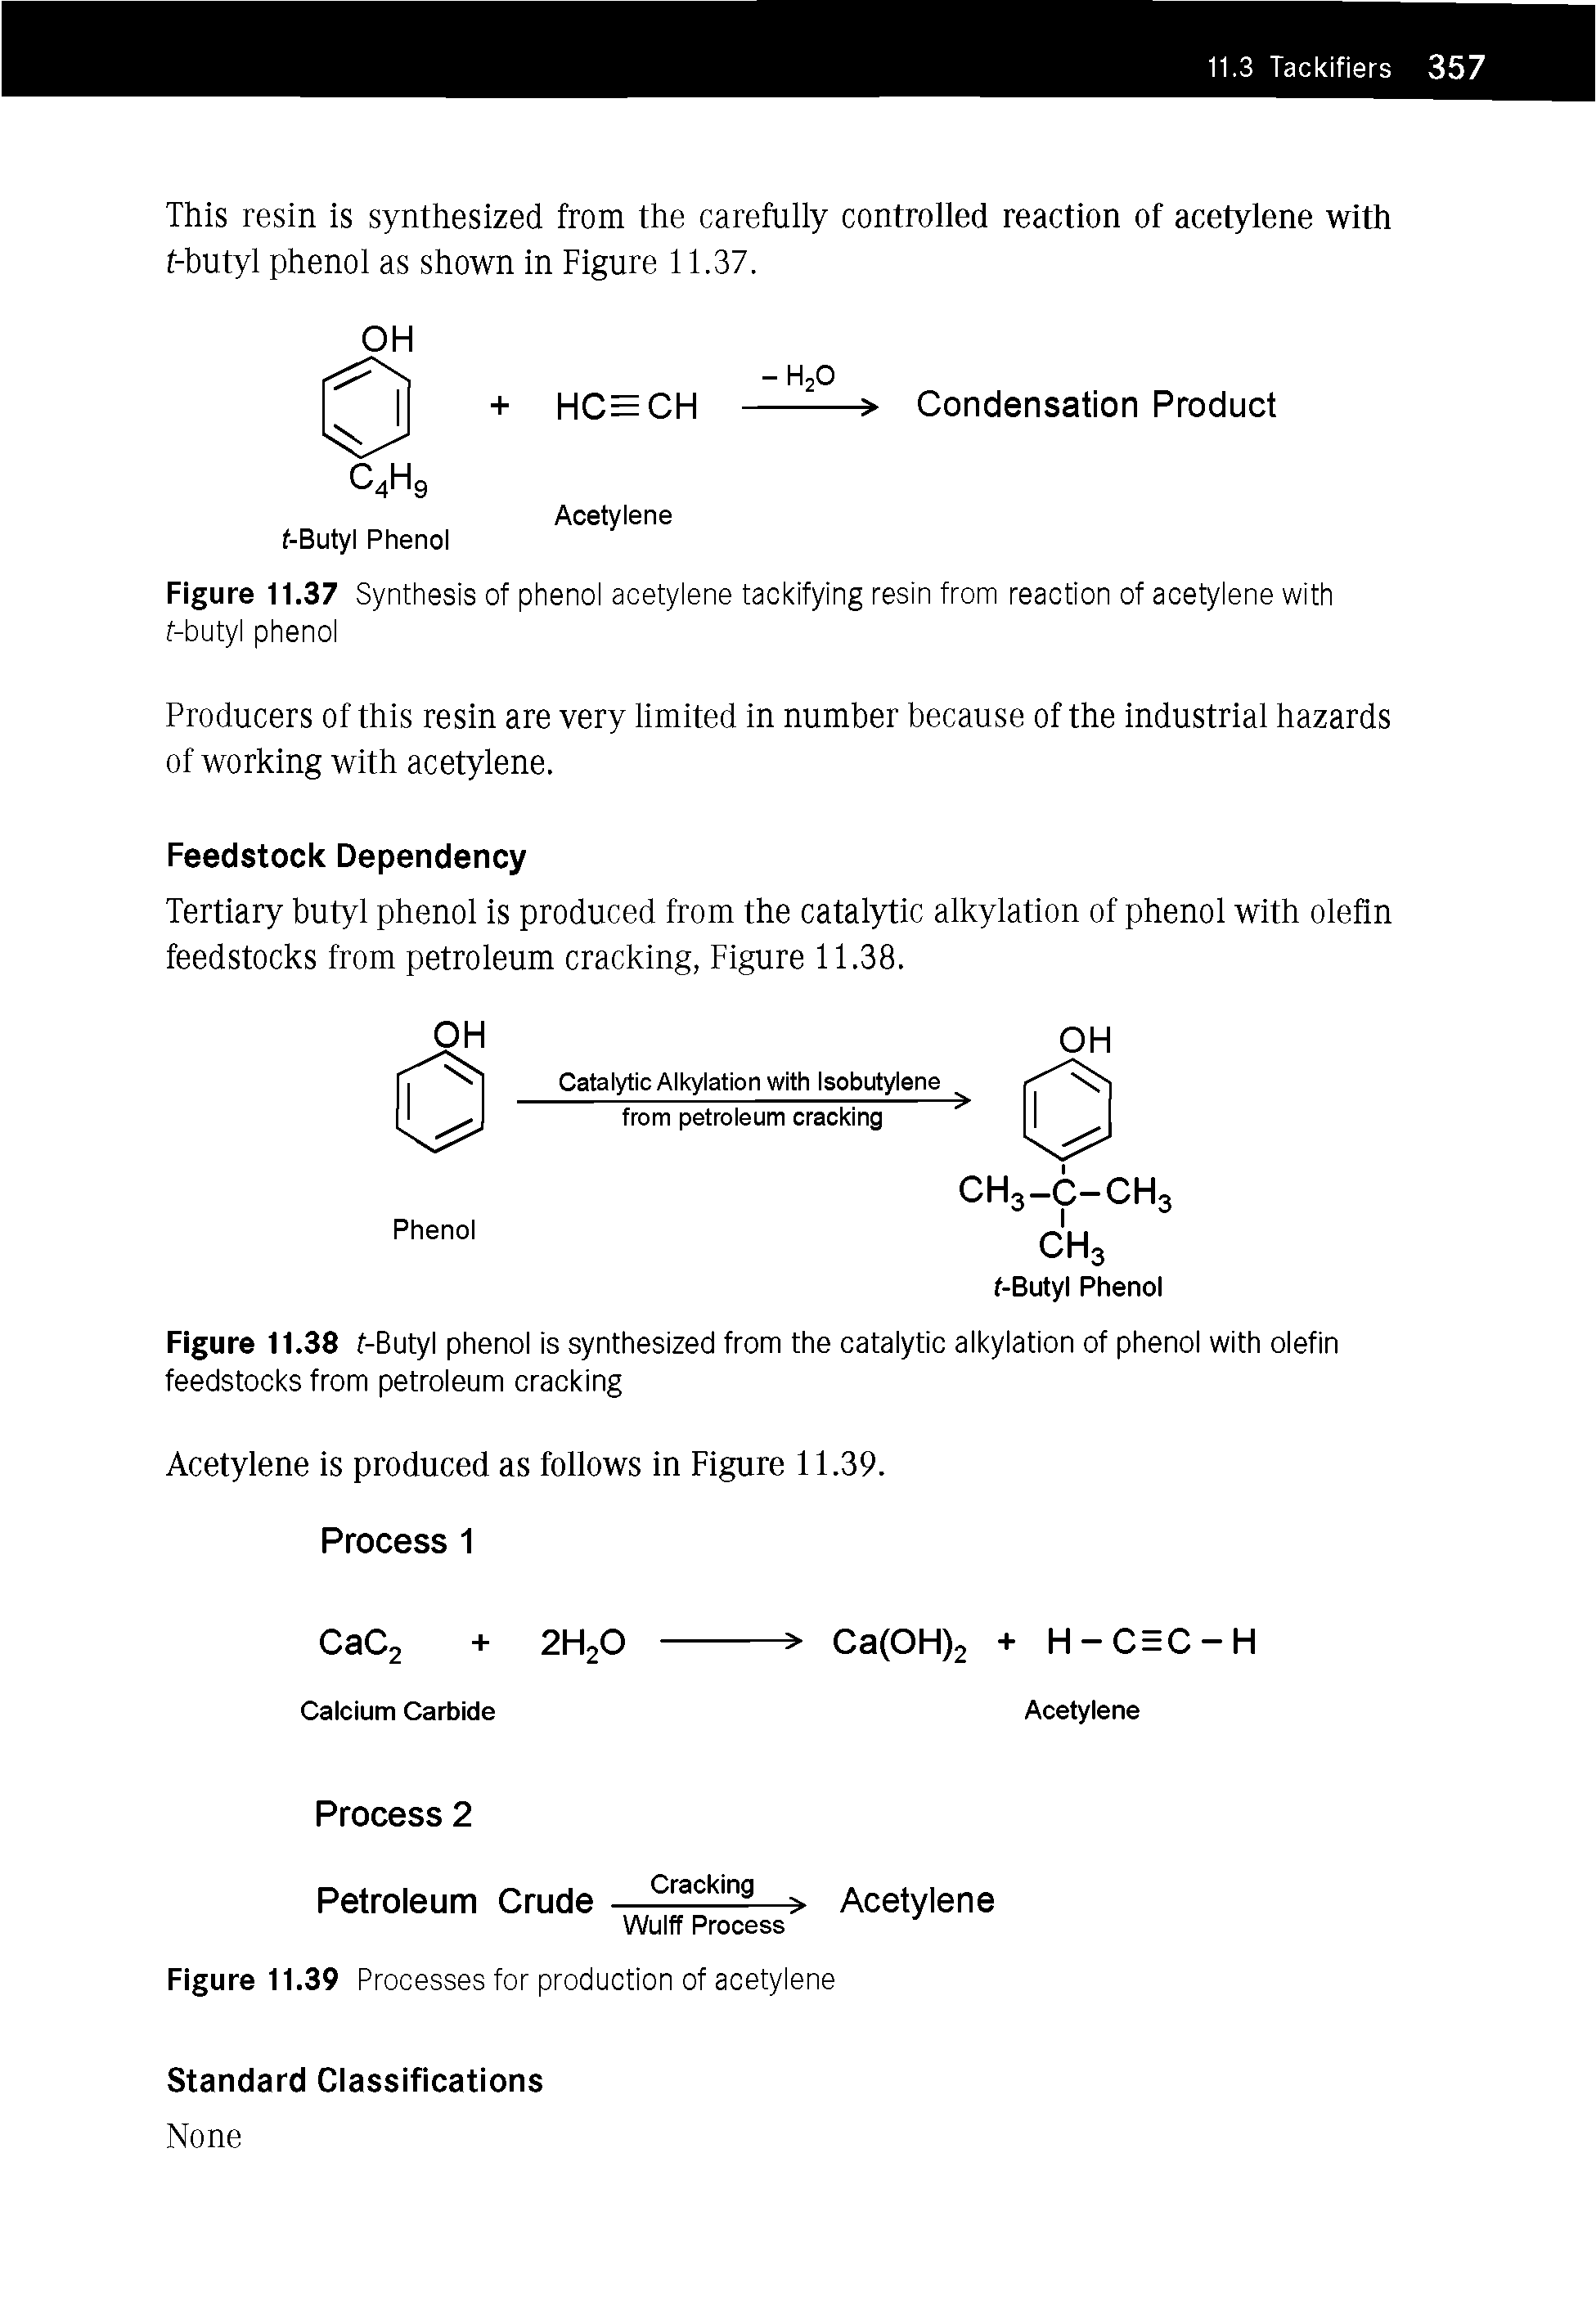 Figure 11.37 Synthesis of phenol acetylene tackifying resin from reaction of acetylene with f-butyl phenol...